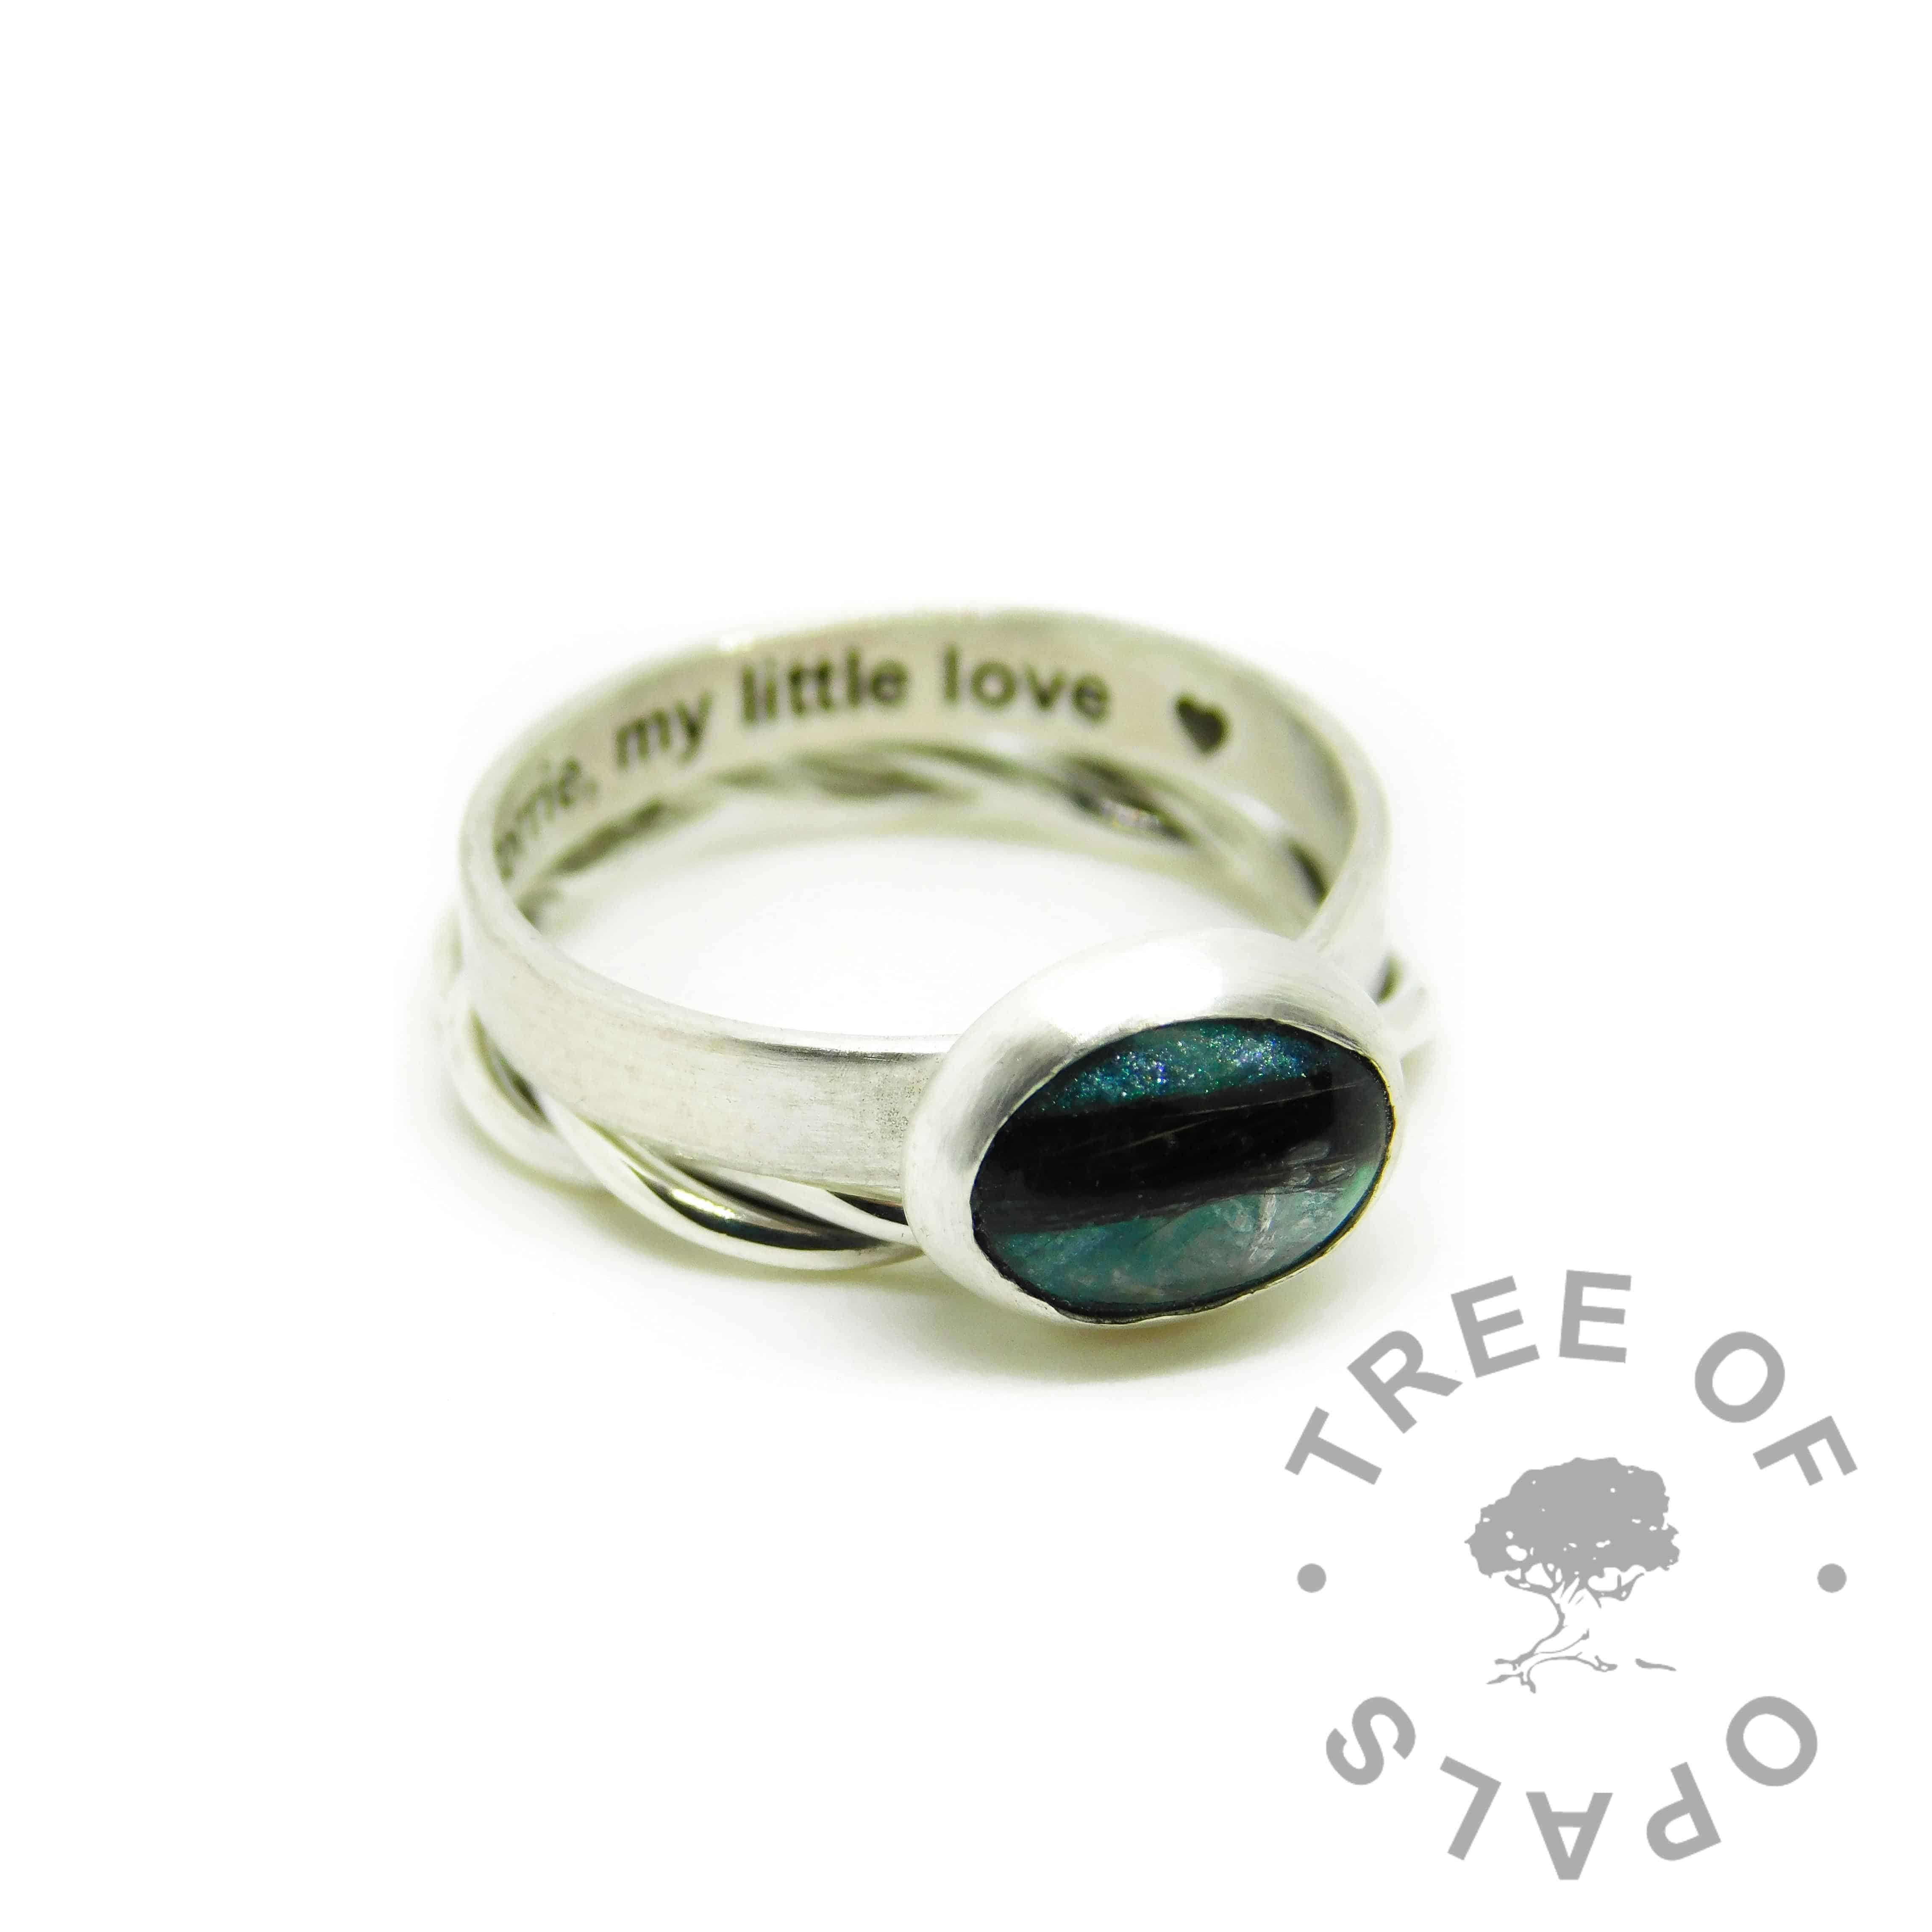 mermaid teal resin sparkle mix and hair ring, brushed band engraved inside with arial font, shown with a twisted wire stacking band